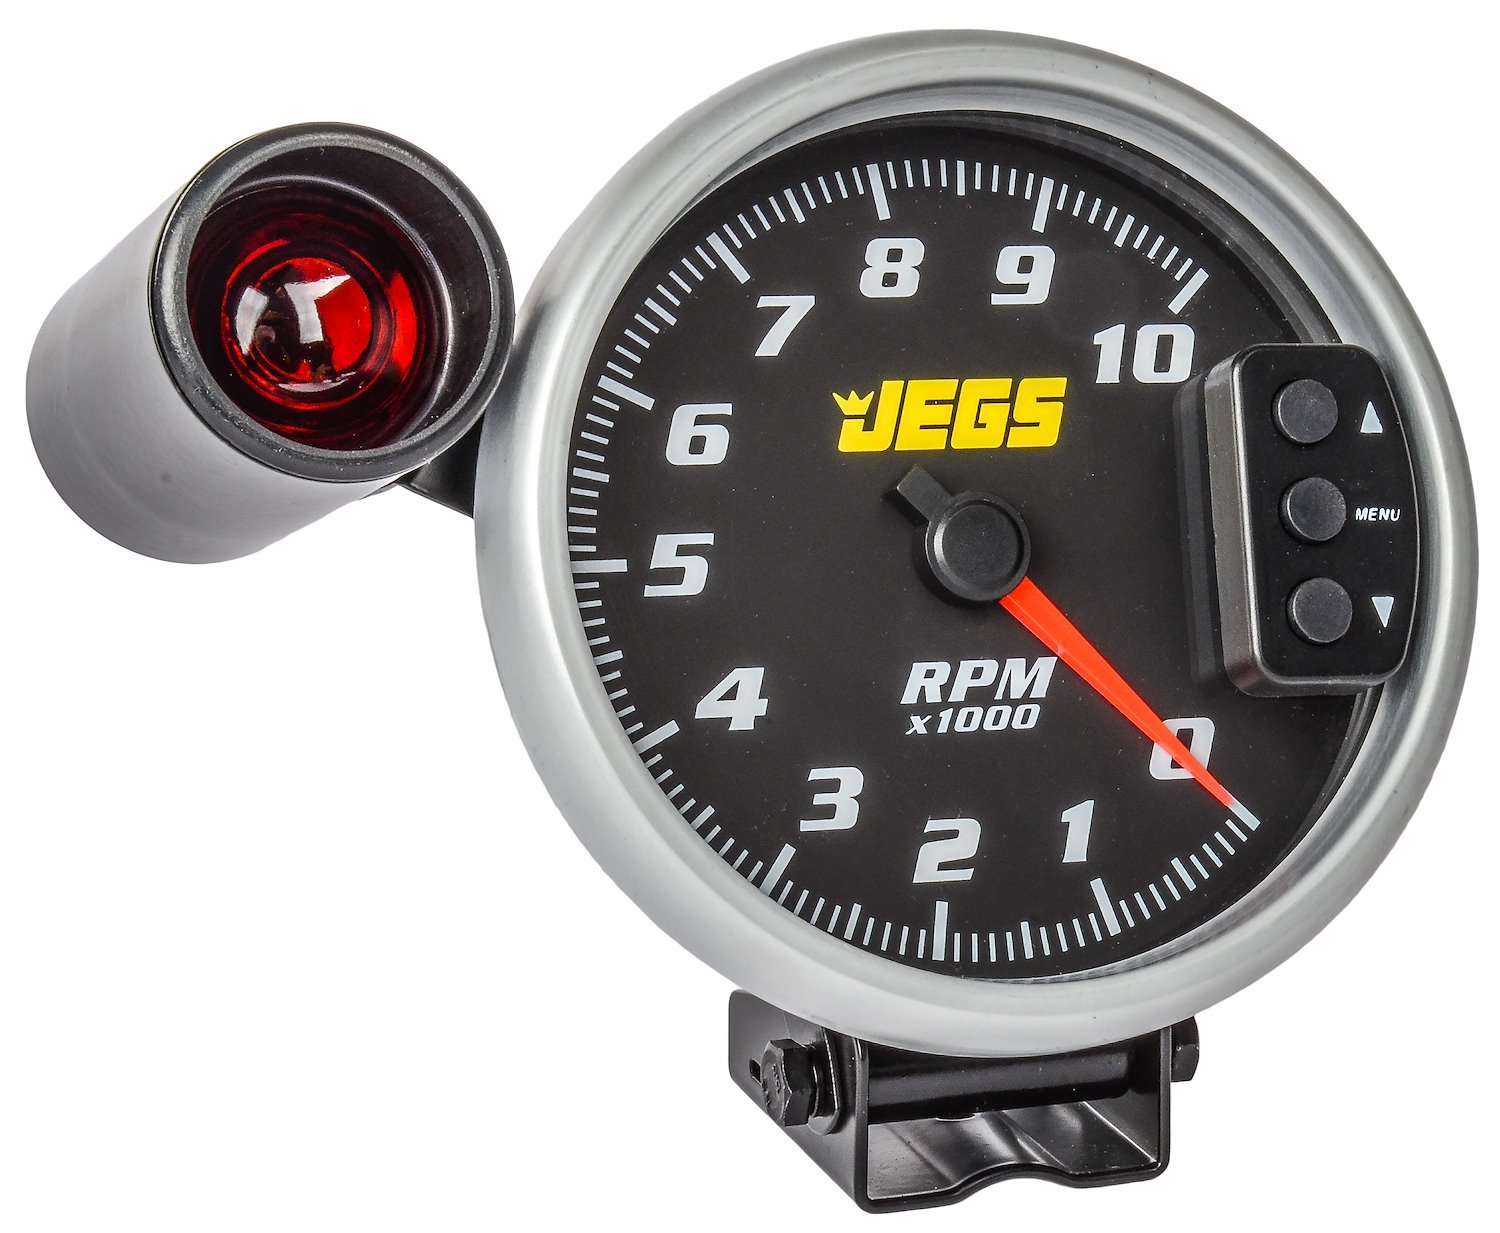 JEGS 41260: 5 in. Tachometer | 0-10,000 RPM | Electrical | Black Housing |  Black Face with Silver Bezel | Super-Bright LED Shift Light | One-Touch  Peak RPM Recall - JEGS High Performance